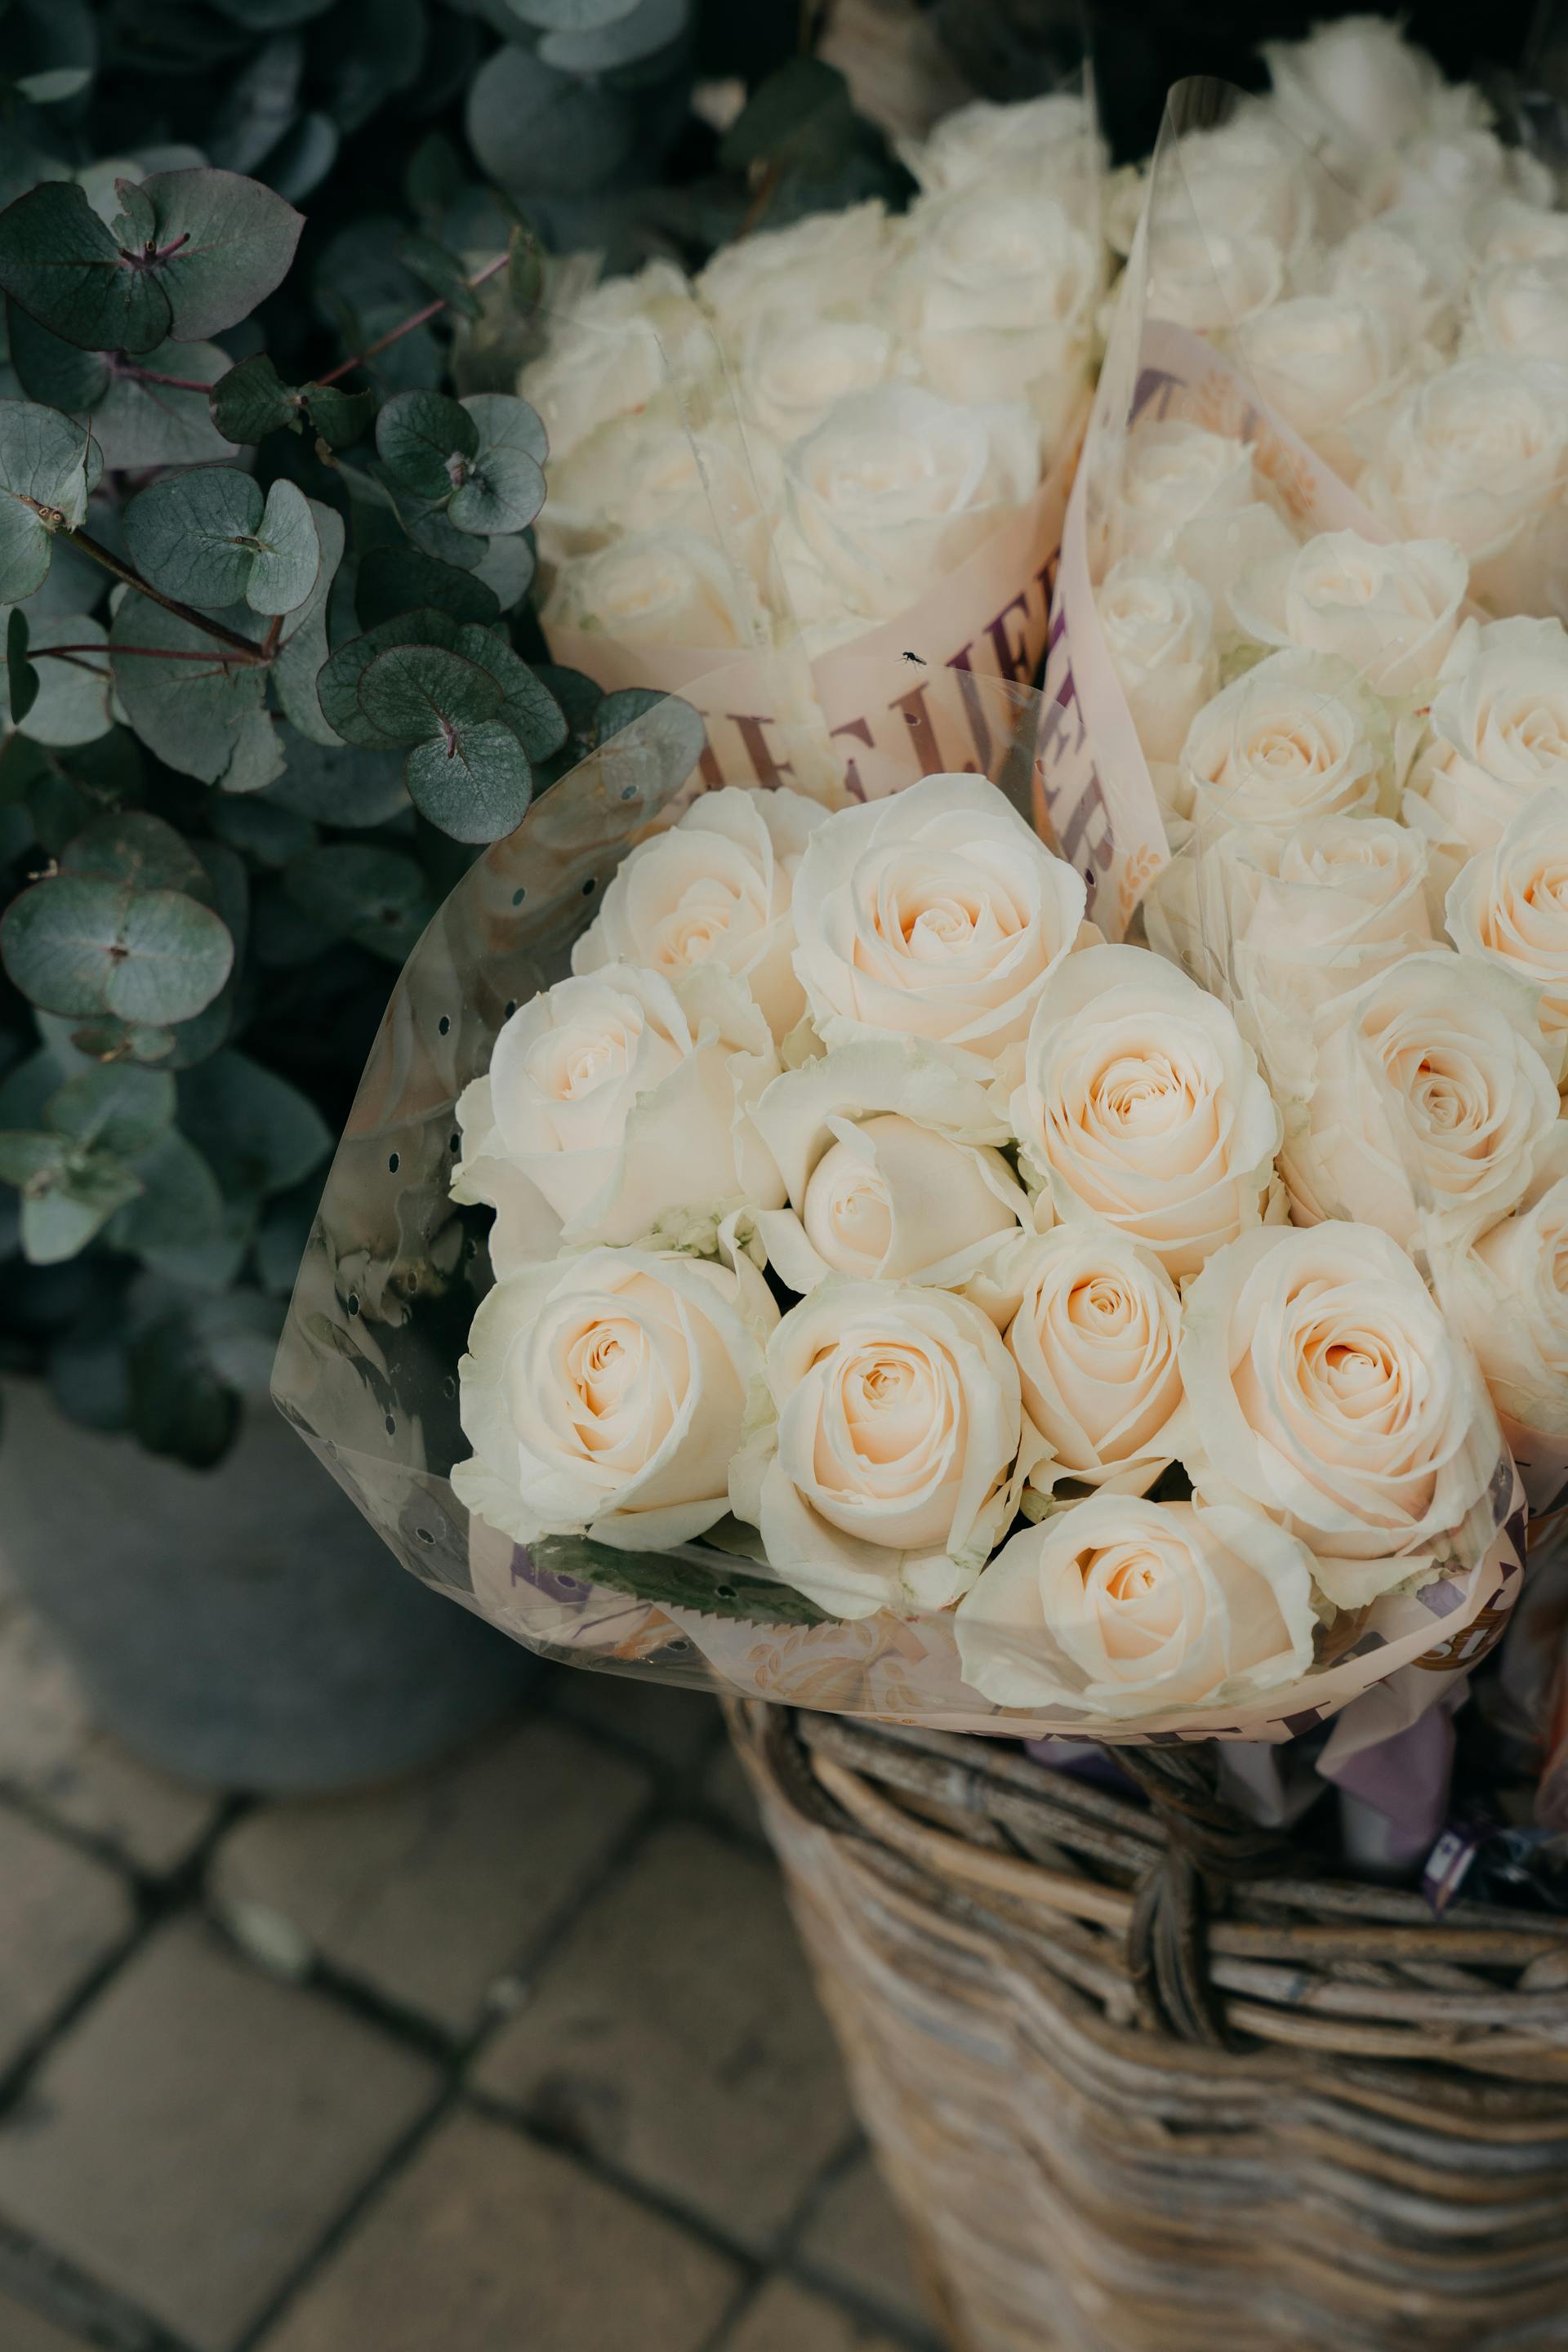 Bouquets of white roses | Source: Pexels